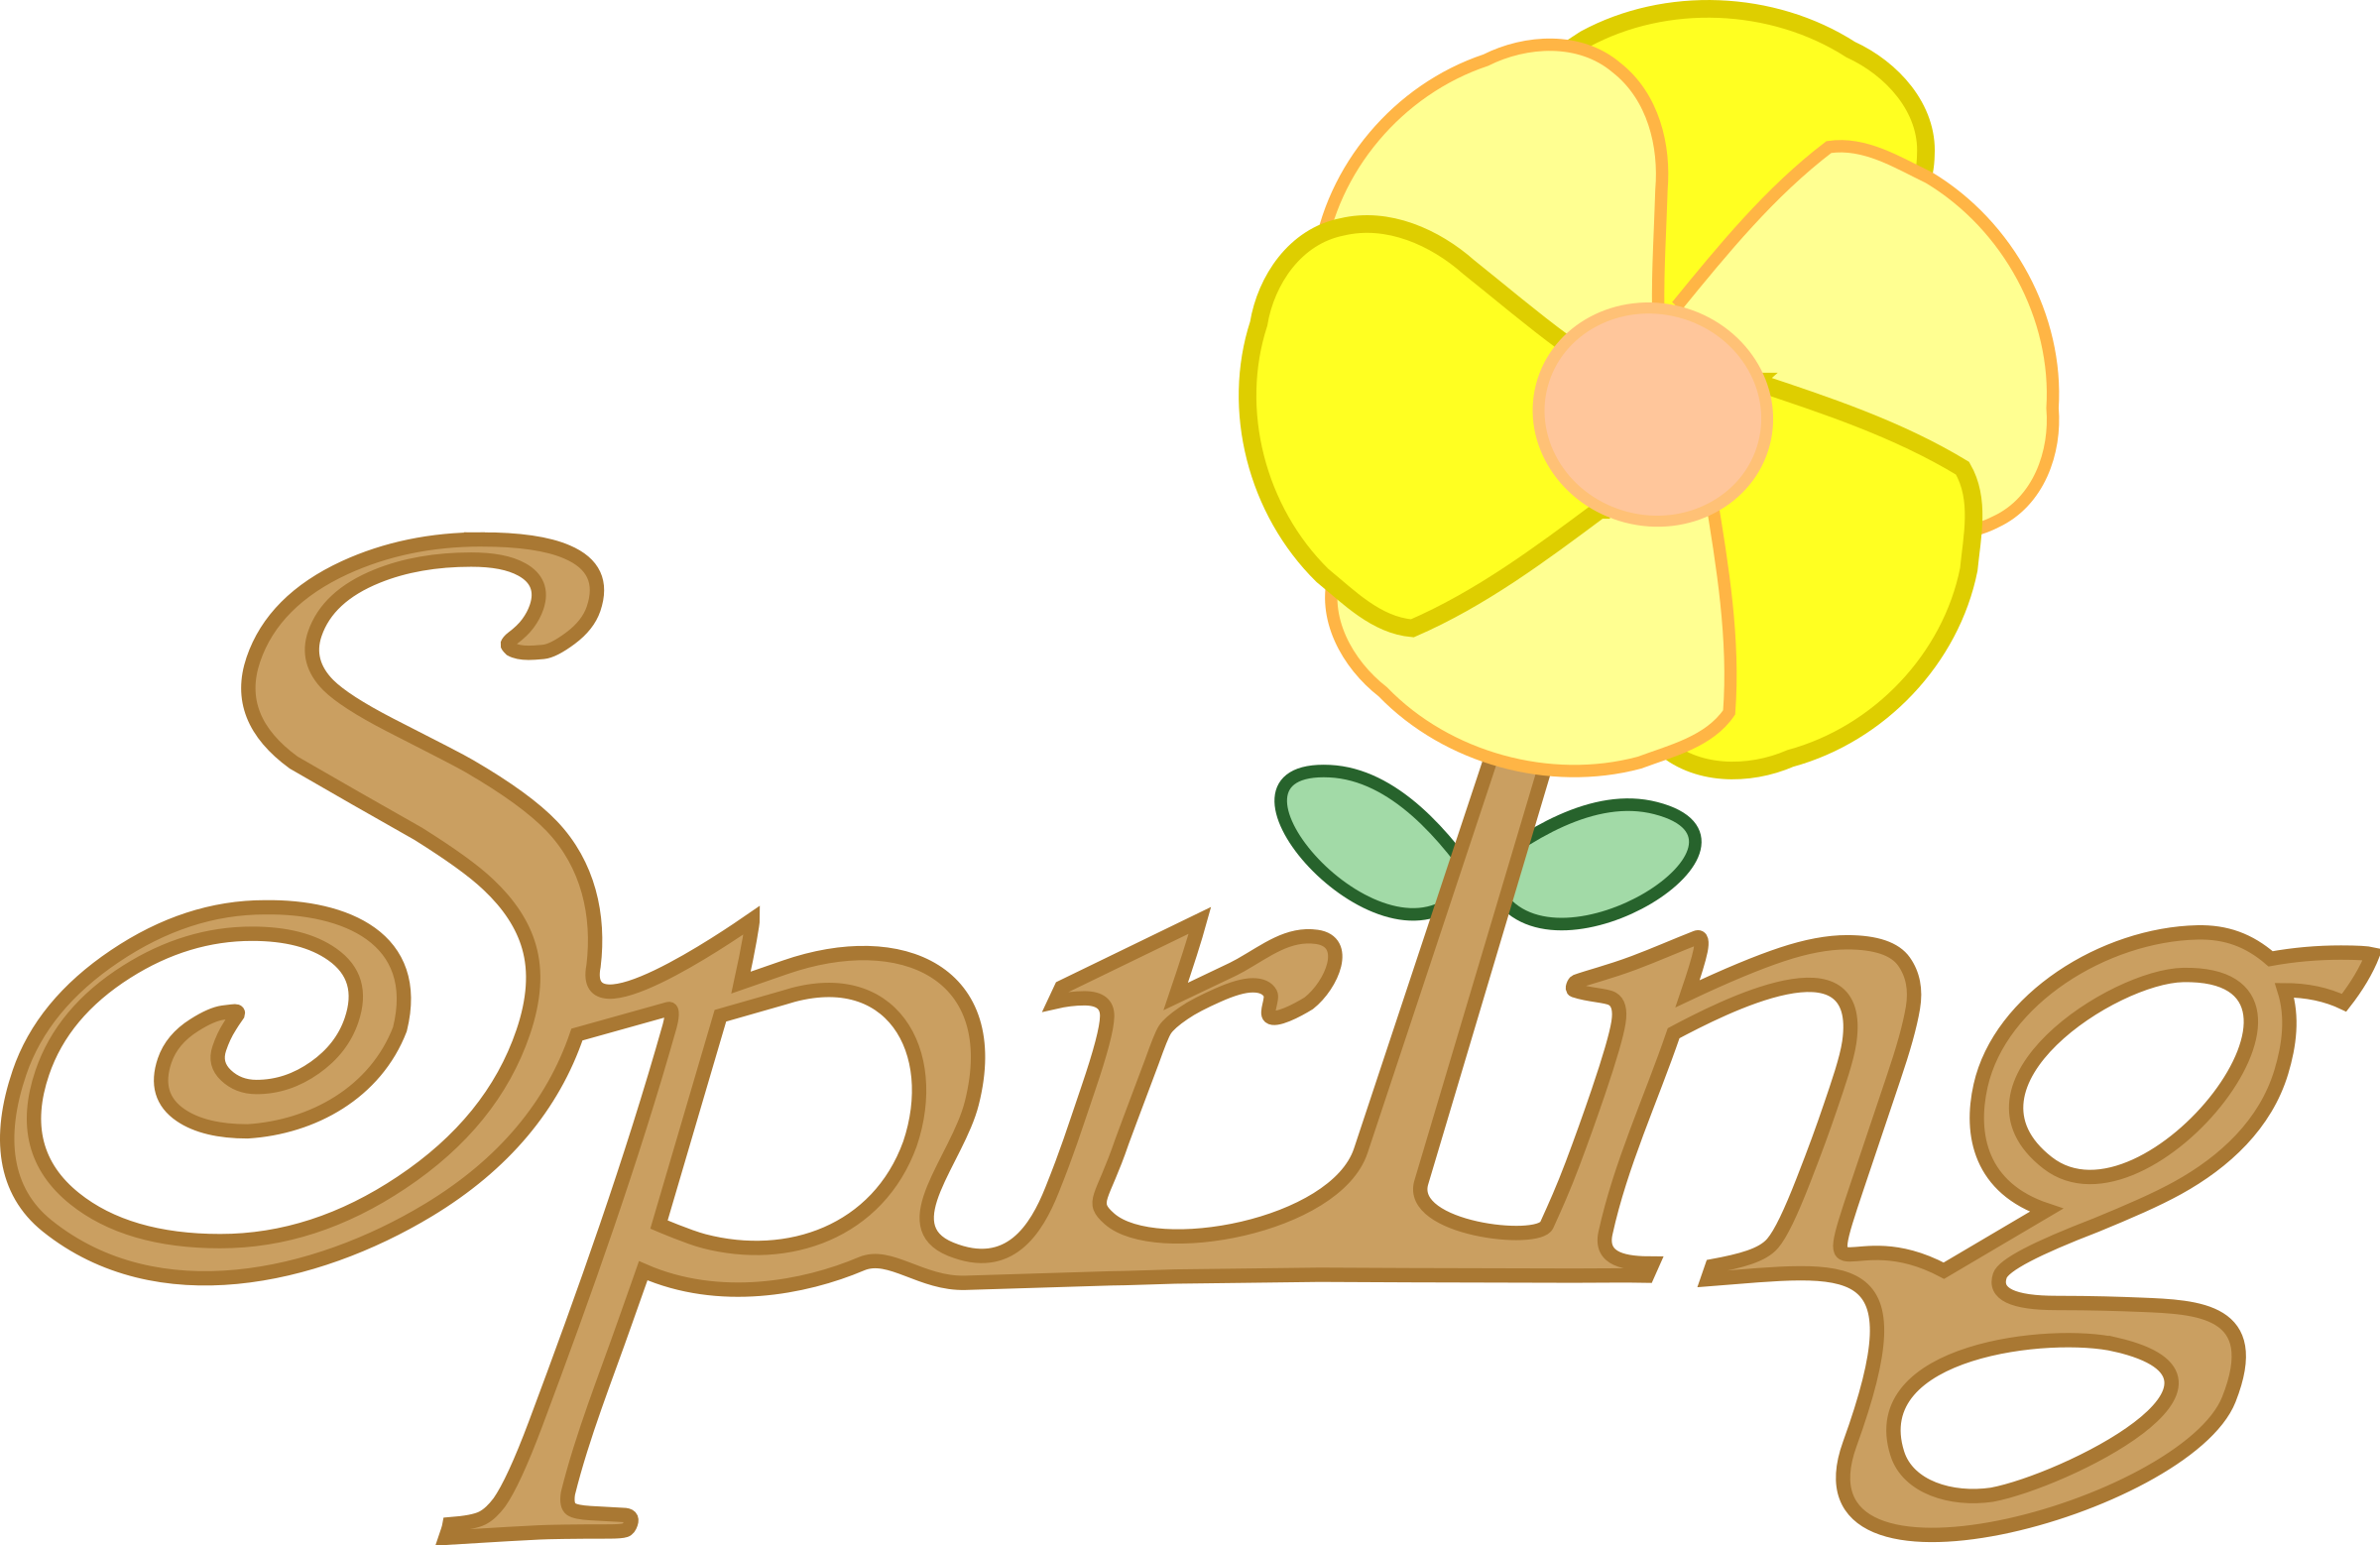 spring reading clipart - photo #26